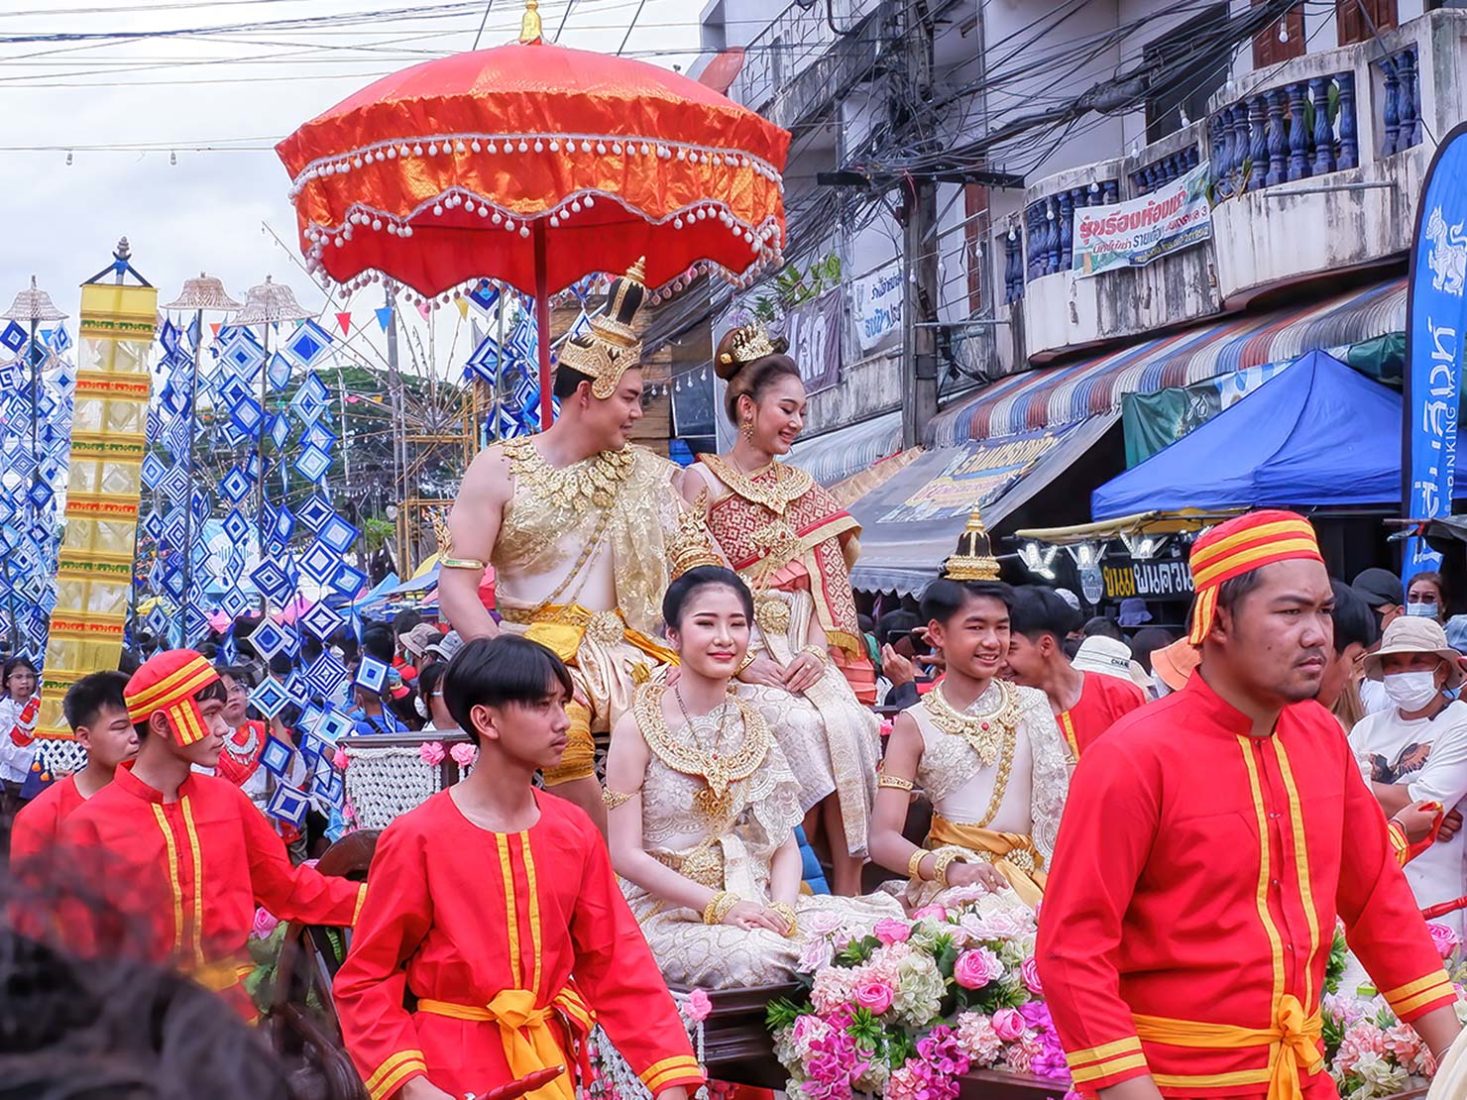 Phi ta Khon Festival king and queen ride atop a float in the parade in Dan Sai